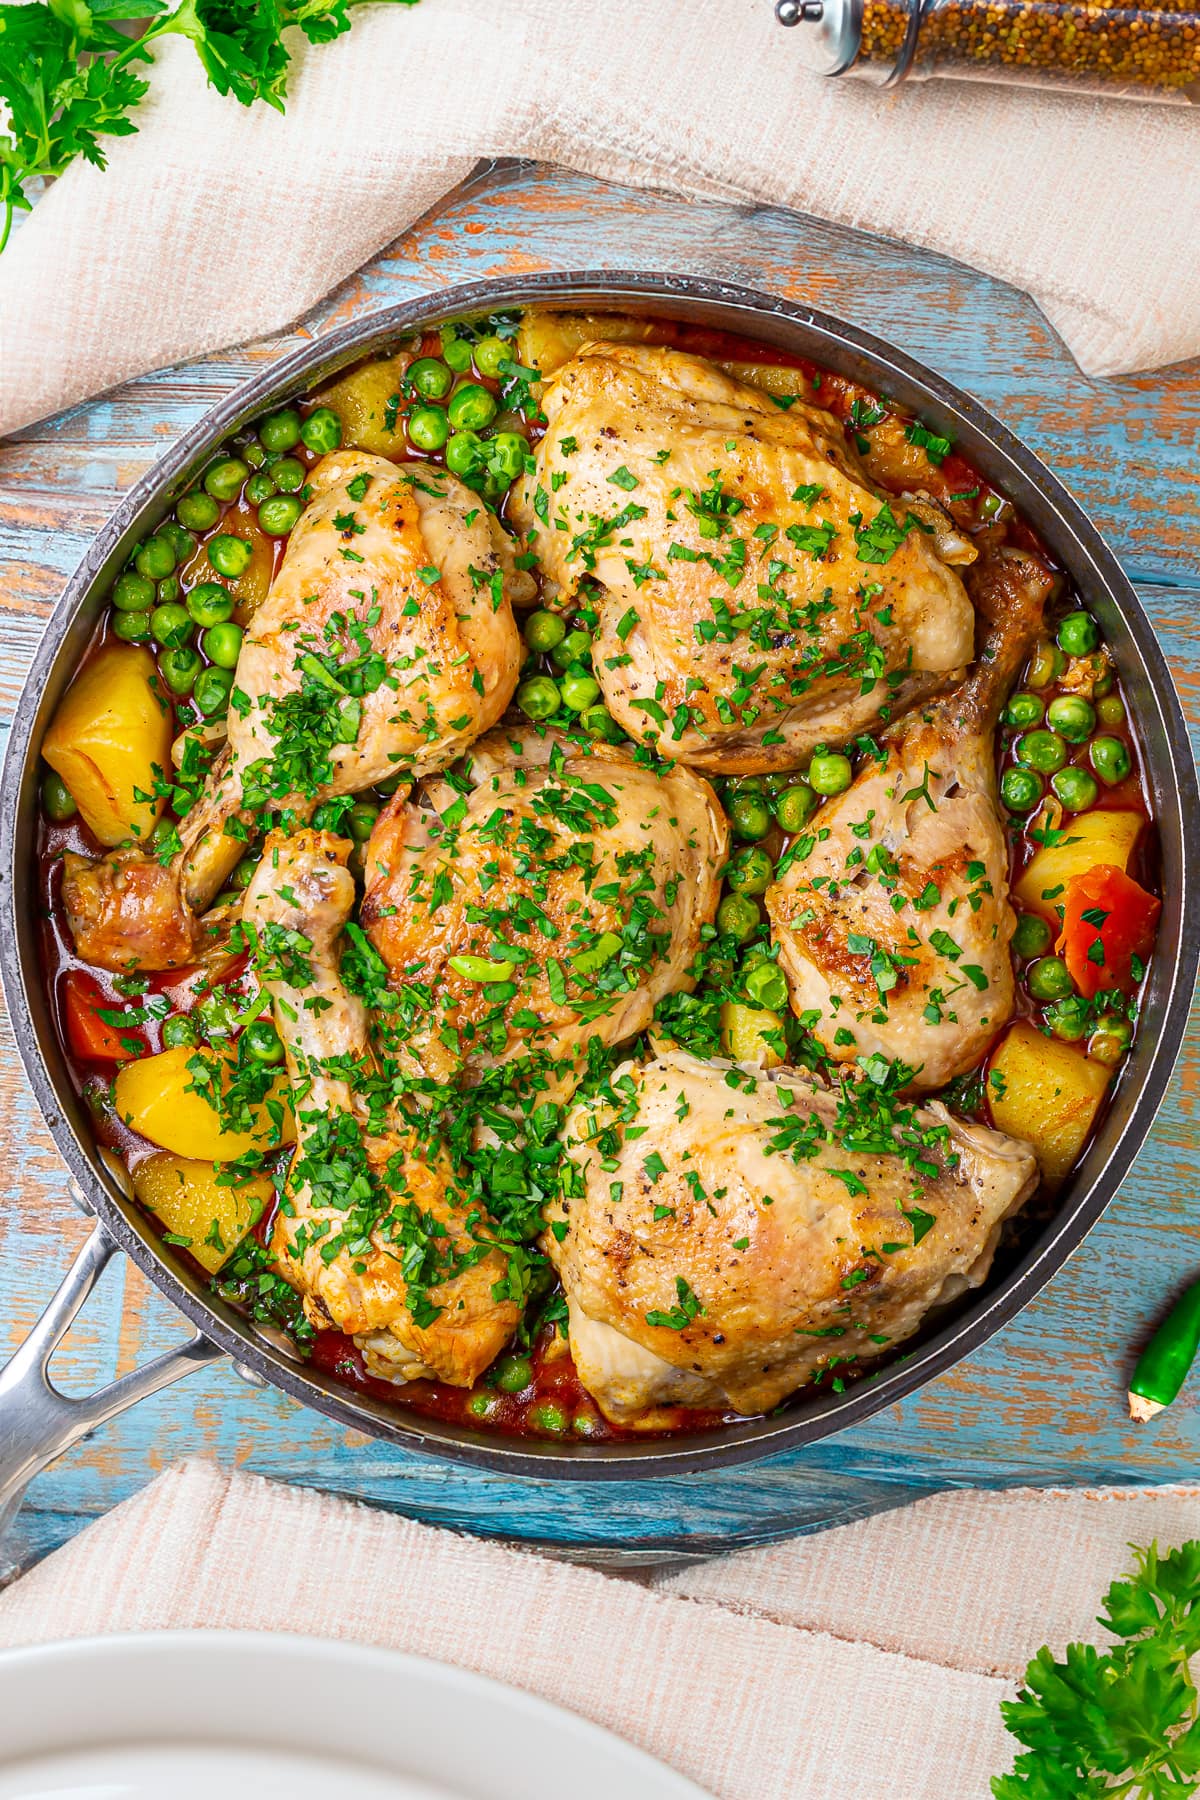 A completed chicken stew garnished with fresh chopped parsley, featuring tender chicken legs, peas, carrots, and potatoes in a rich broth.